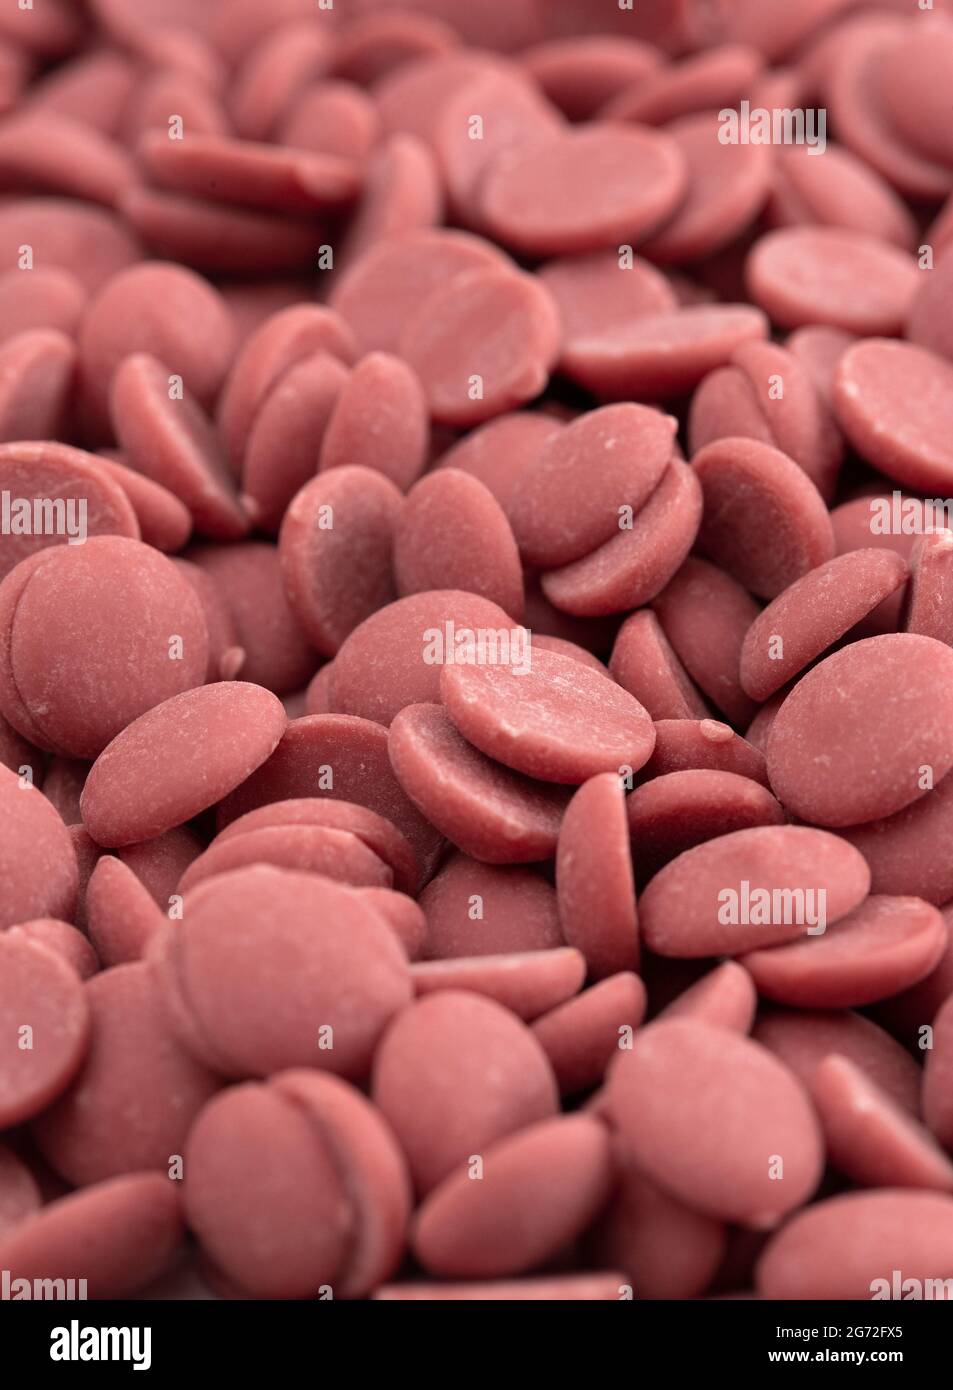 A Background of Authentic Ruby Chocolate Drops Stock Photo